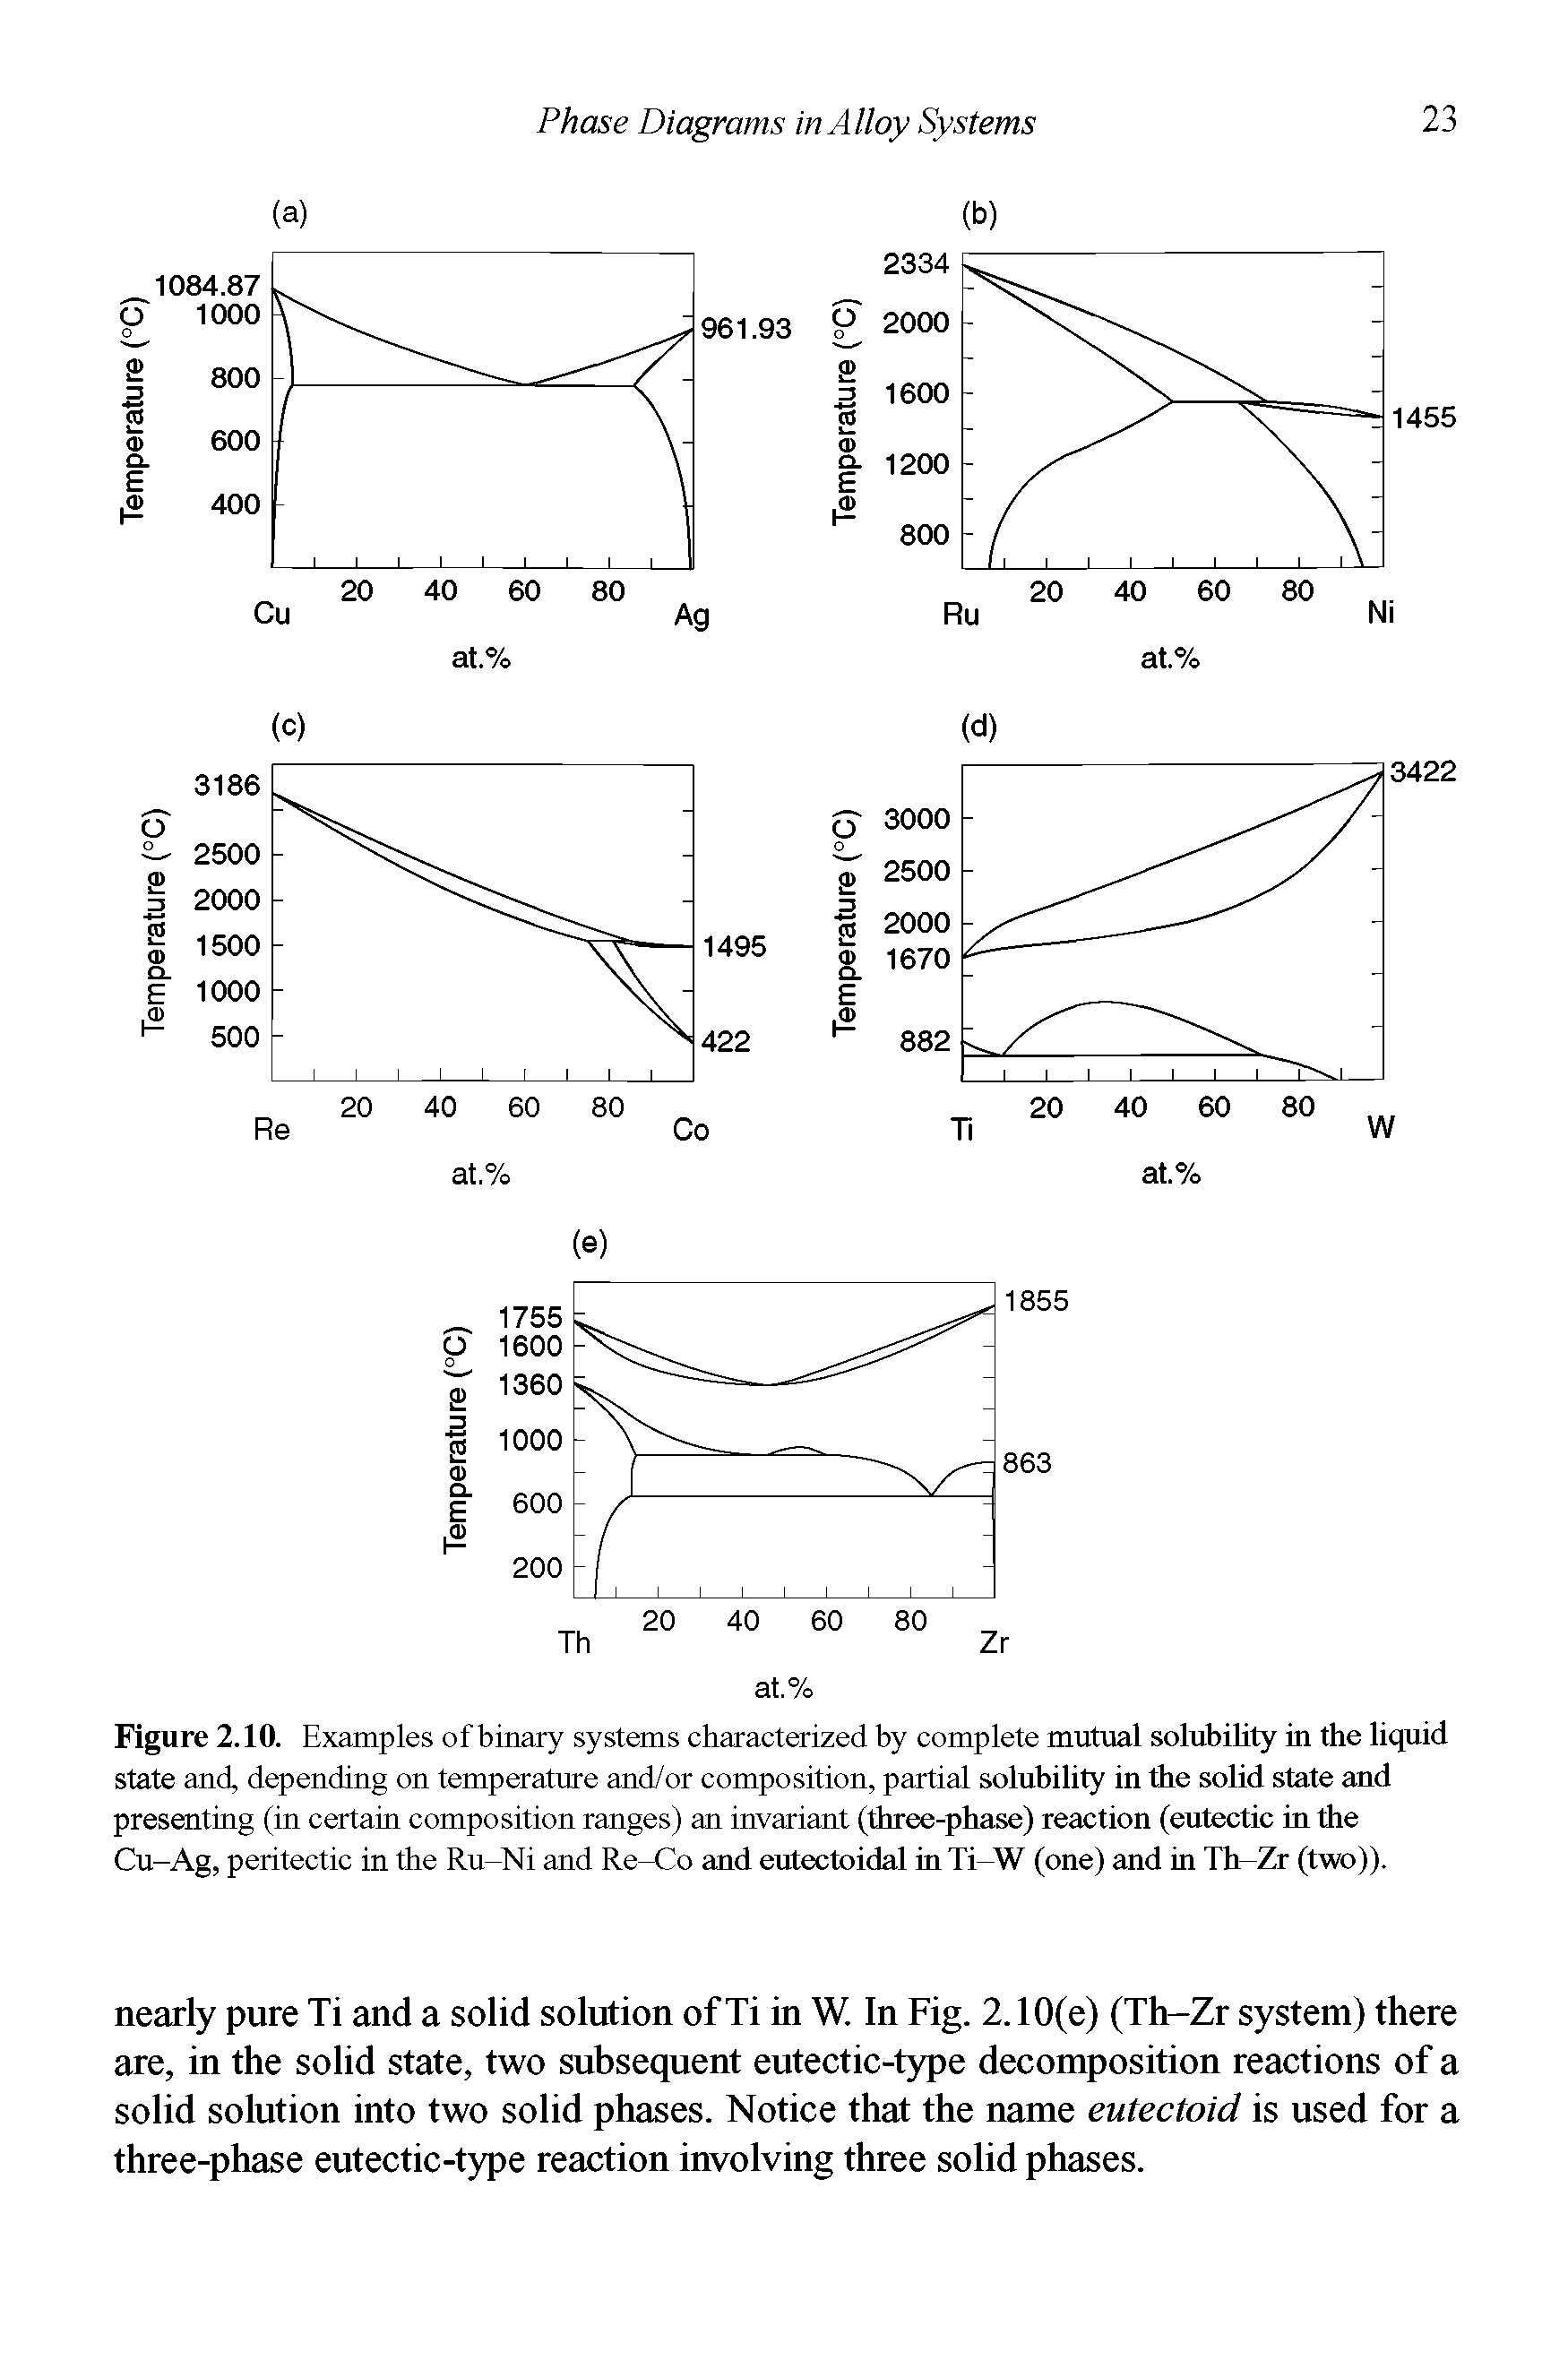 Figure 2.10. Examples of binary systems characterized by complete mutual solubility in the liquid state and, depending on temperature and/or composition, partial solubility in the solid state and presenting (in certain composition ranges) an invariant (three-phase) reaction (eutectic in the Cu-Ag, peritectic in the Ru-Ni and Re-Co and eutectoidal in Ti-W (one) and in Th-Zr (two)).